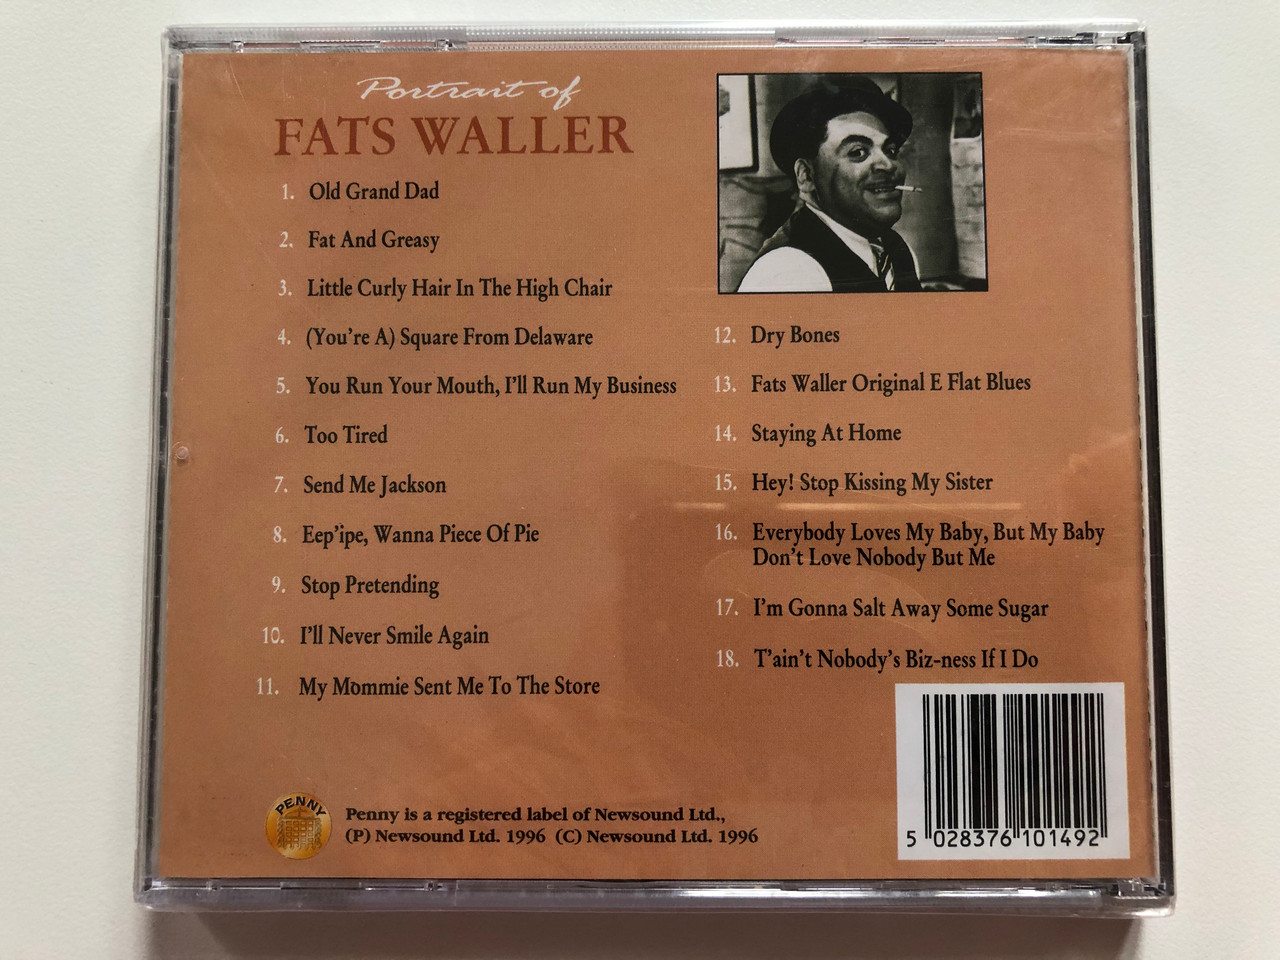 https://cdn10.bigcommerce.com/s-62bdpkt7pb/products/0/images/207729/Portrait_Of_Fats_Waller_Songs_Include_Old_Grand_Dad_Dry_Bones_Stop_Pretending_Fats_Waller_Original_E_Flat_Blues_Too_Tired_and_many_more_Penny_Audio_CD_1996_PYCD_149_2__07543.1642417662.1280.1280.JPG?c=2&_gl=1*1y5t5vc*_ga*MjA2NTIxMjE2MC4xNTkwNTEyNTMy*_ga_WS2VZYPC6G*MTY0MjQwMzU5OS4yNjQuMS4xNjQyNDE3MTAwLjM2